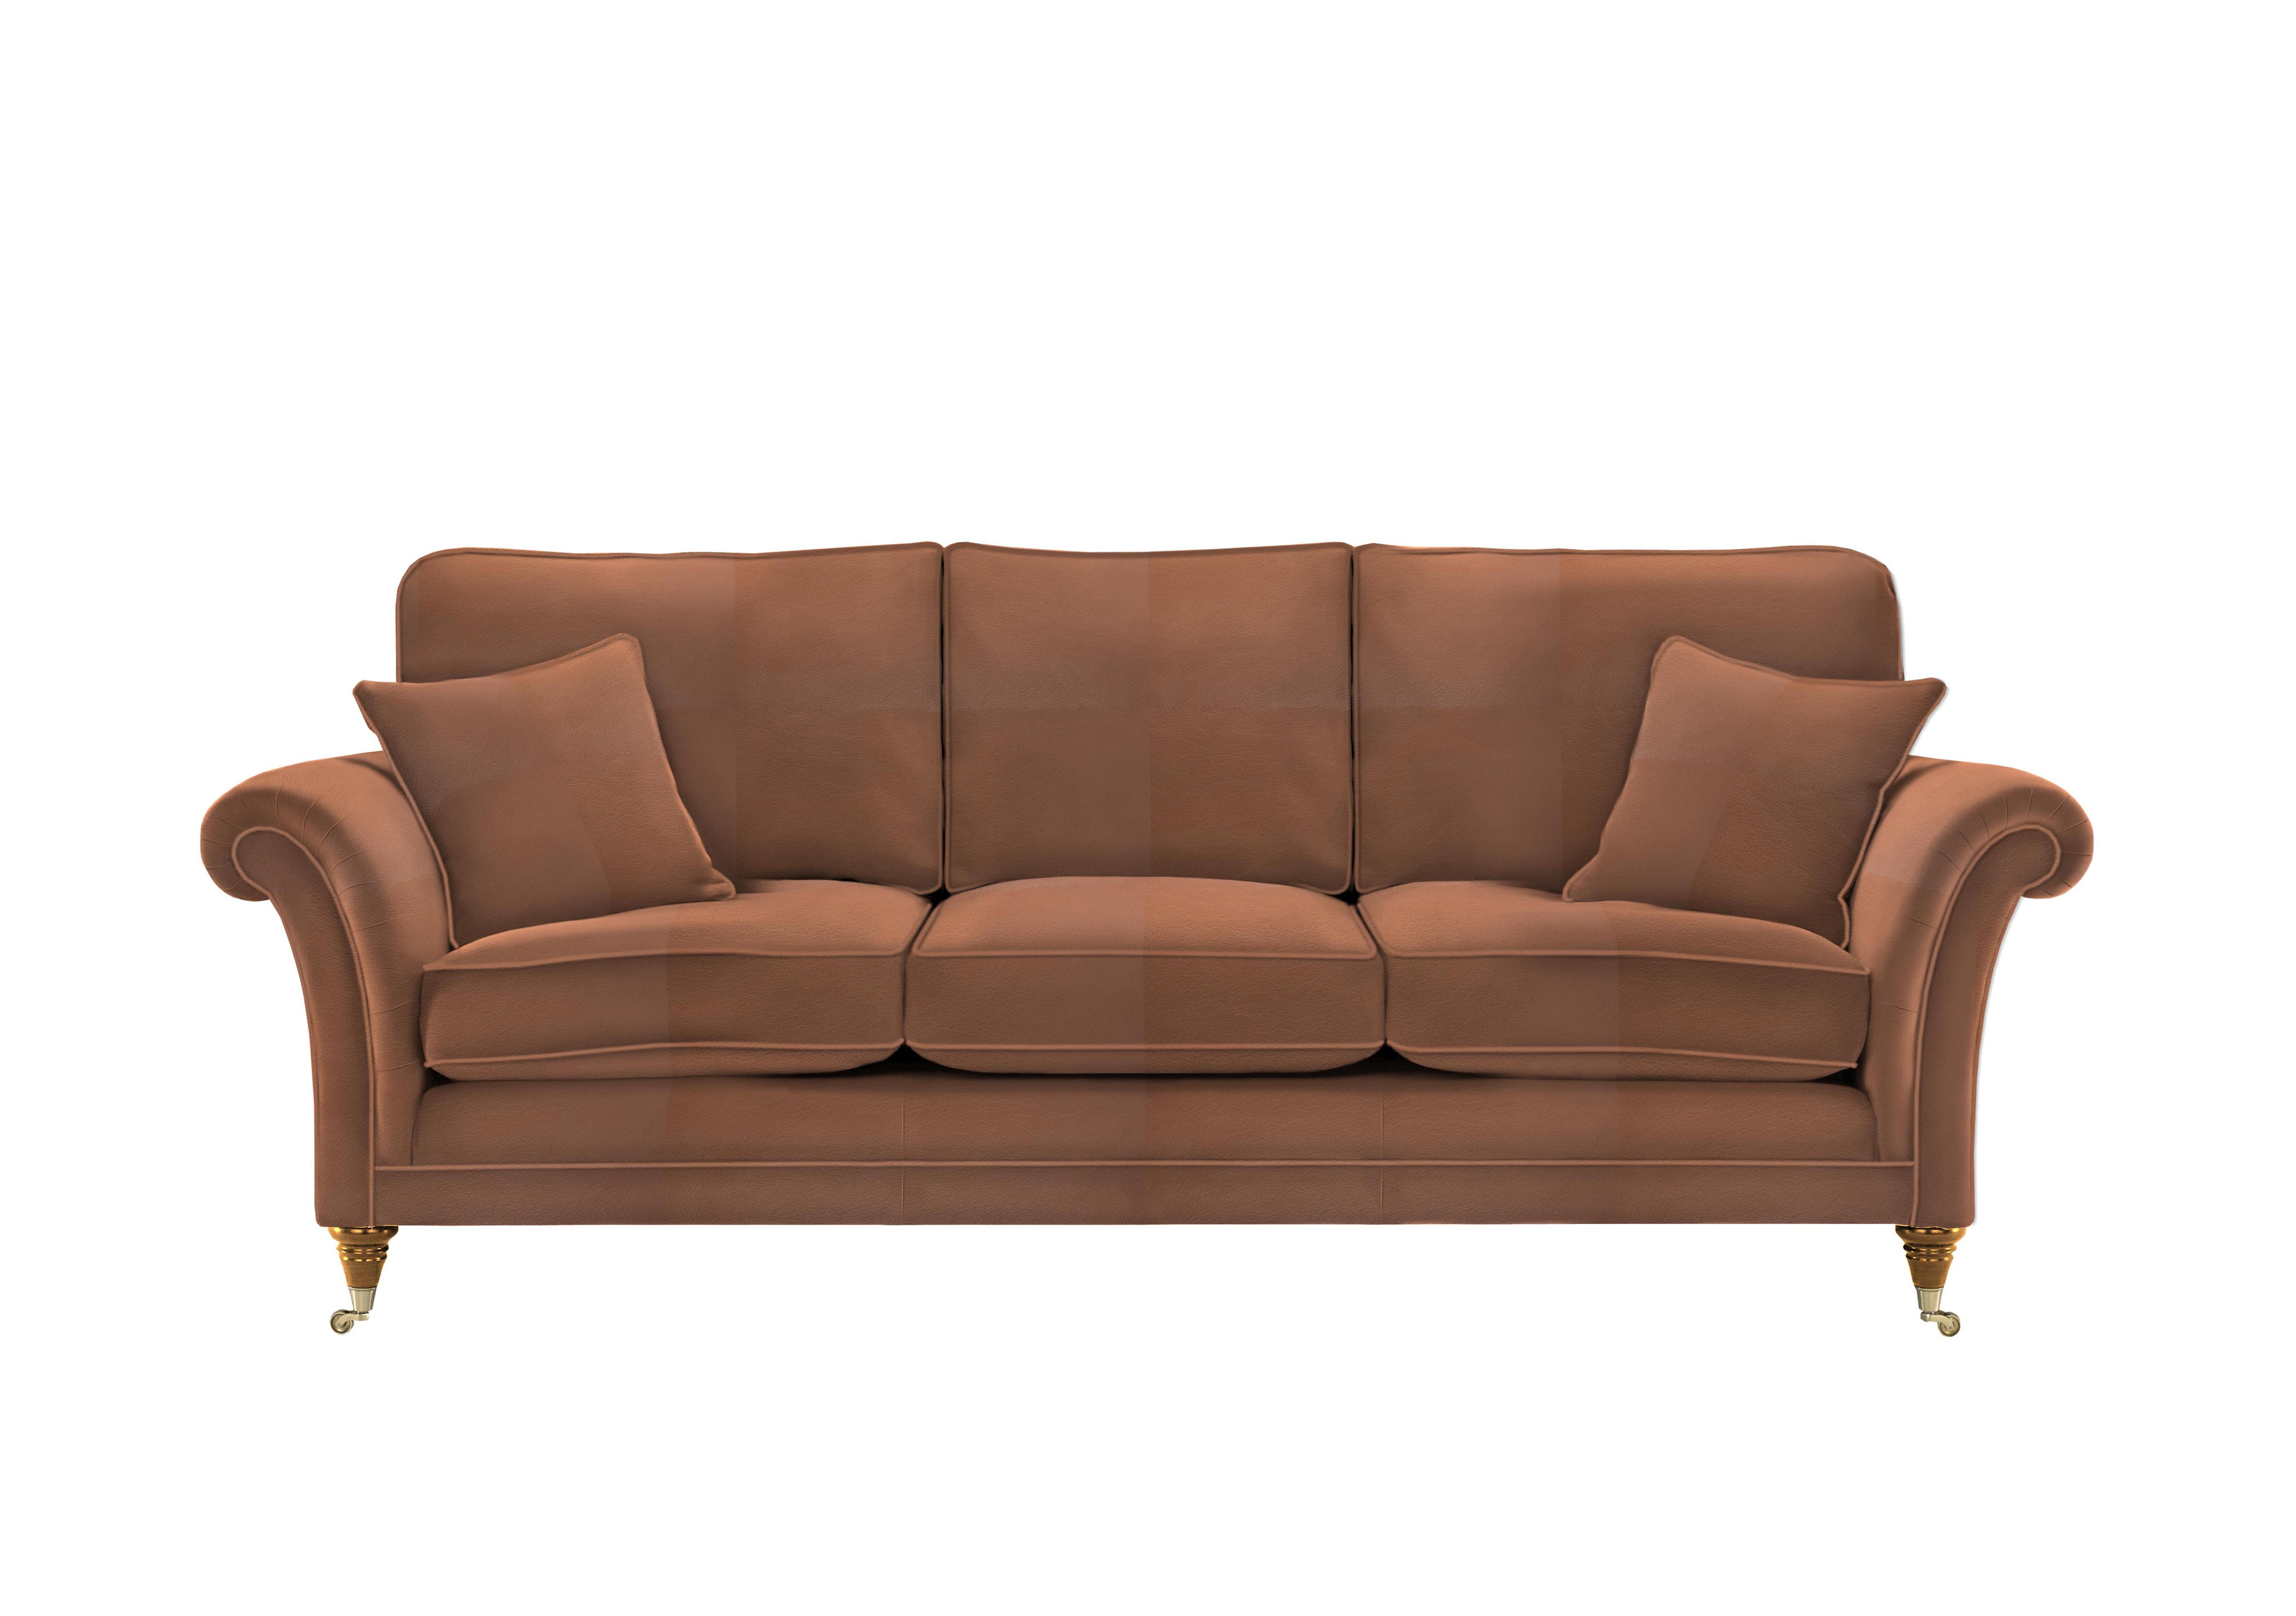 Burghley Grand Leather Sofa in 009019-0025 Roma Nutmeg on Furniture Village